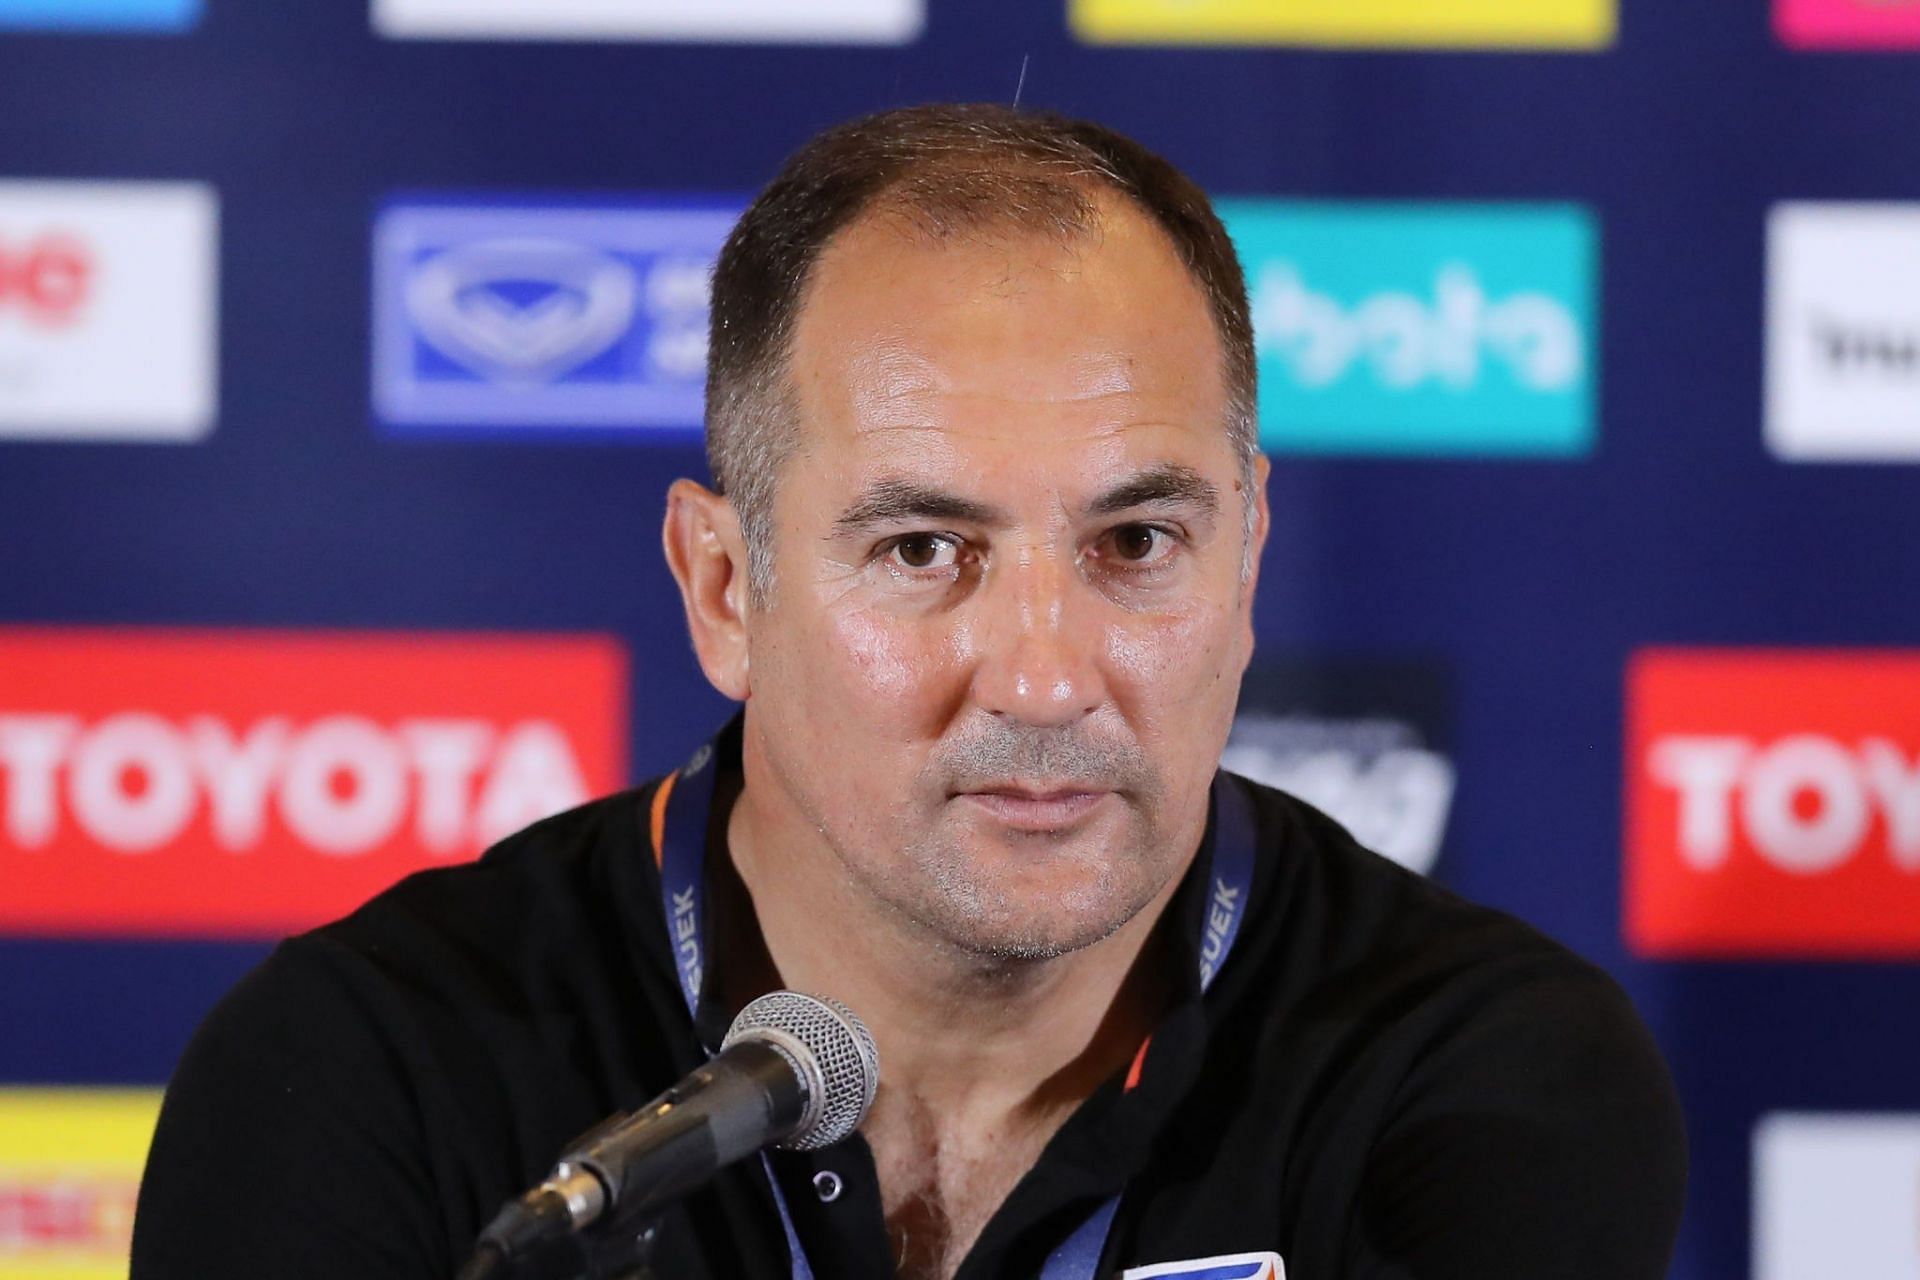 Igor Stimac took to social media to express his optimism after India secured the Pot 2 spot for the FIFA World Cup Qualification